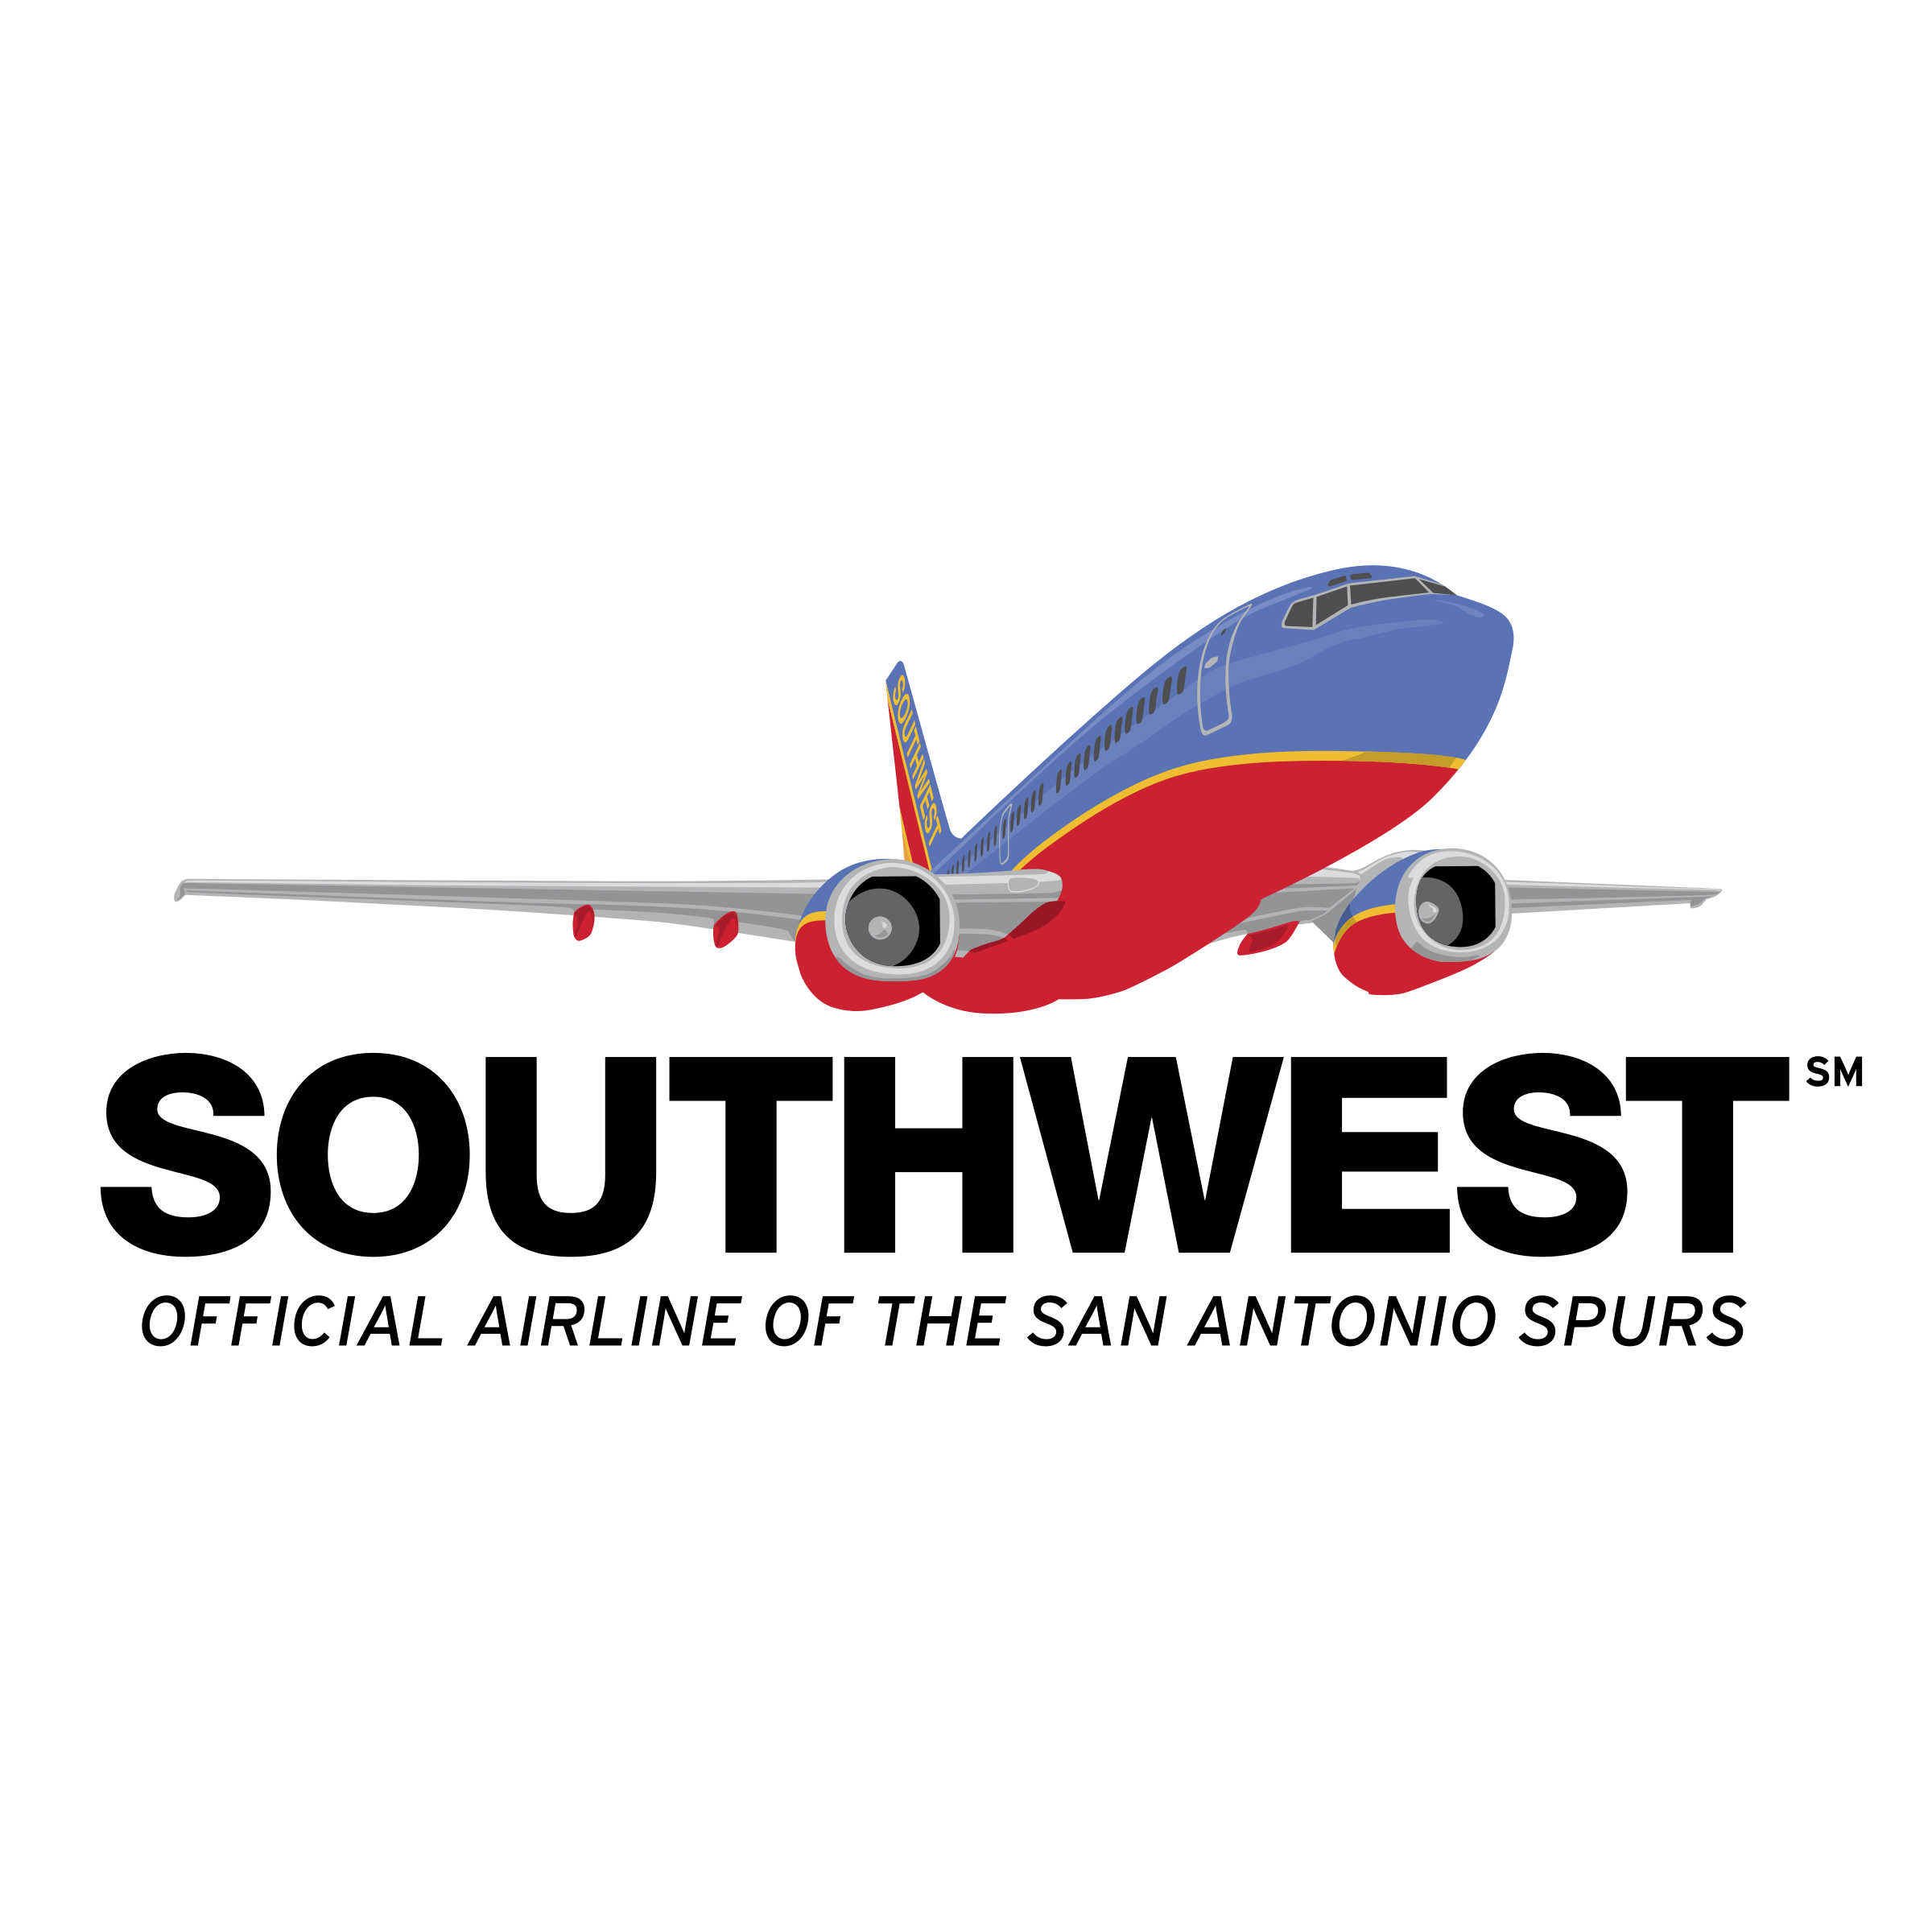 South West Airlines Logo - Southwest Airlines Logo PNG Transparent & SVG Vector - Freebie Supply